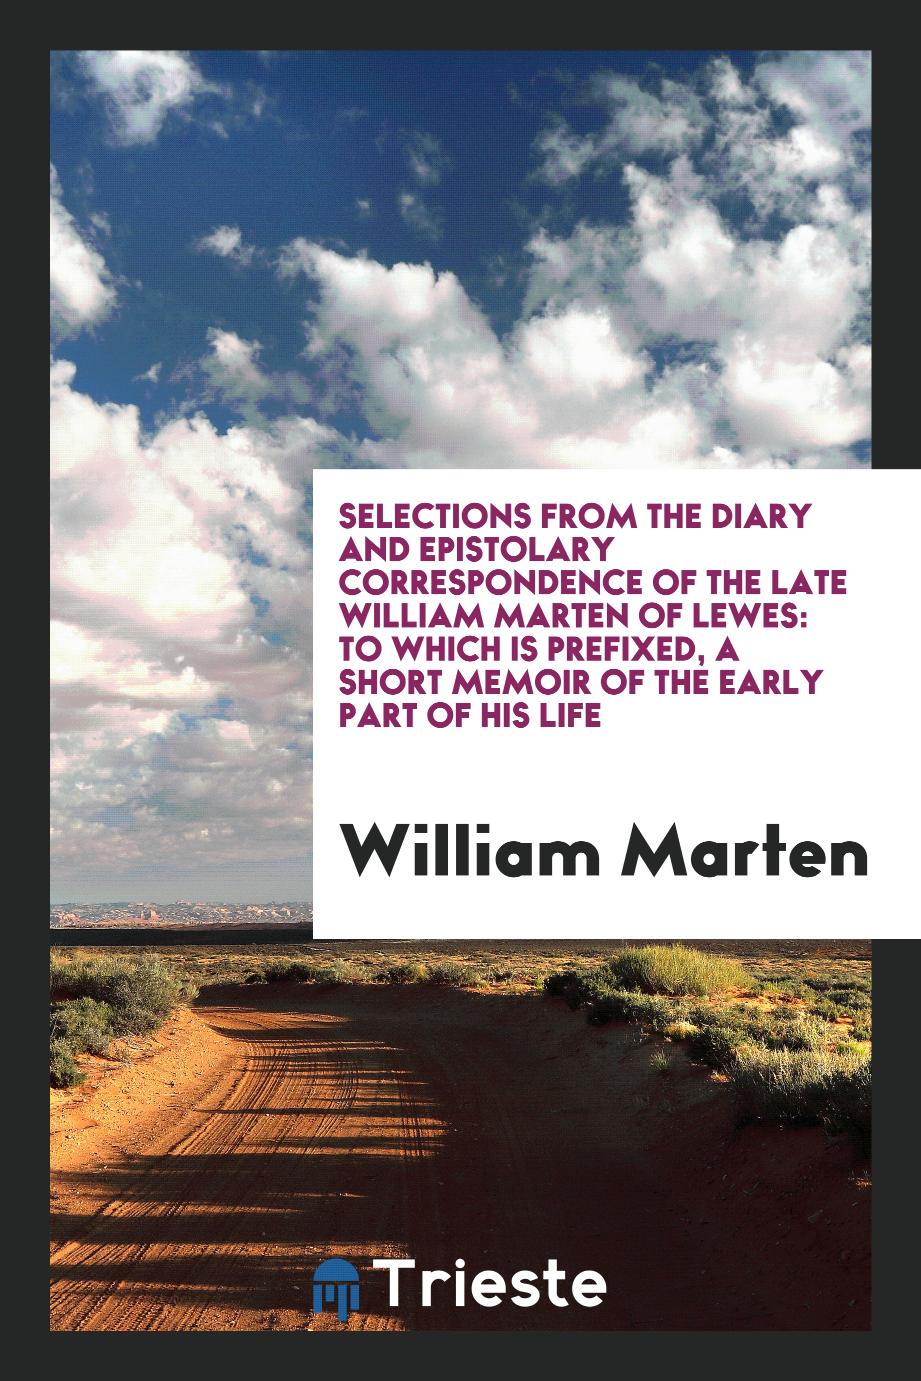 Selections from the Diary and Epistolary Correspondence of the Late William Marten of Lewes: To Which Is Prefixed, a Short Memoir of the Early Part of His Life